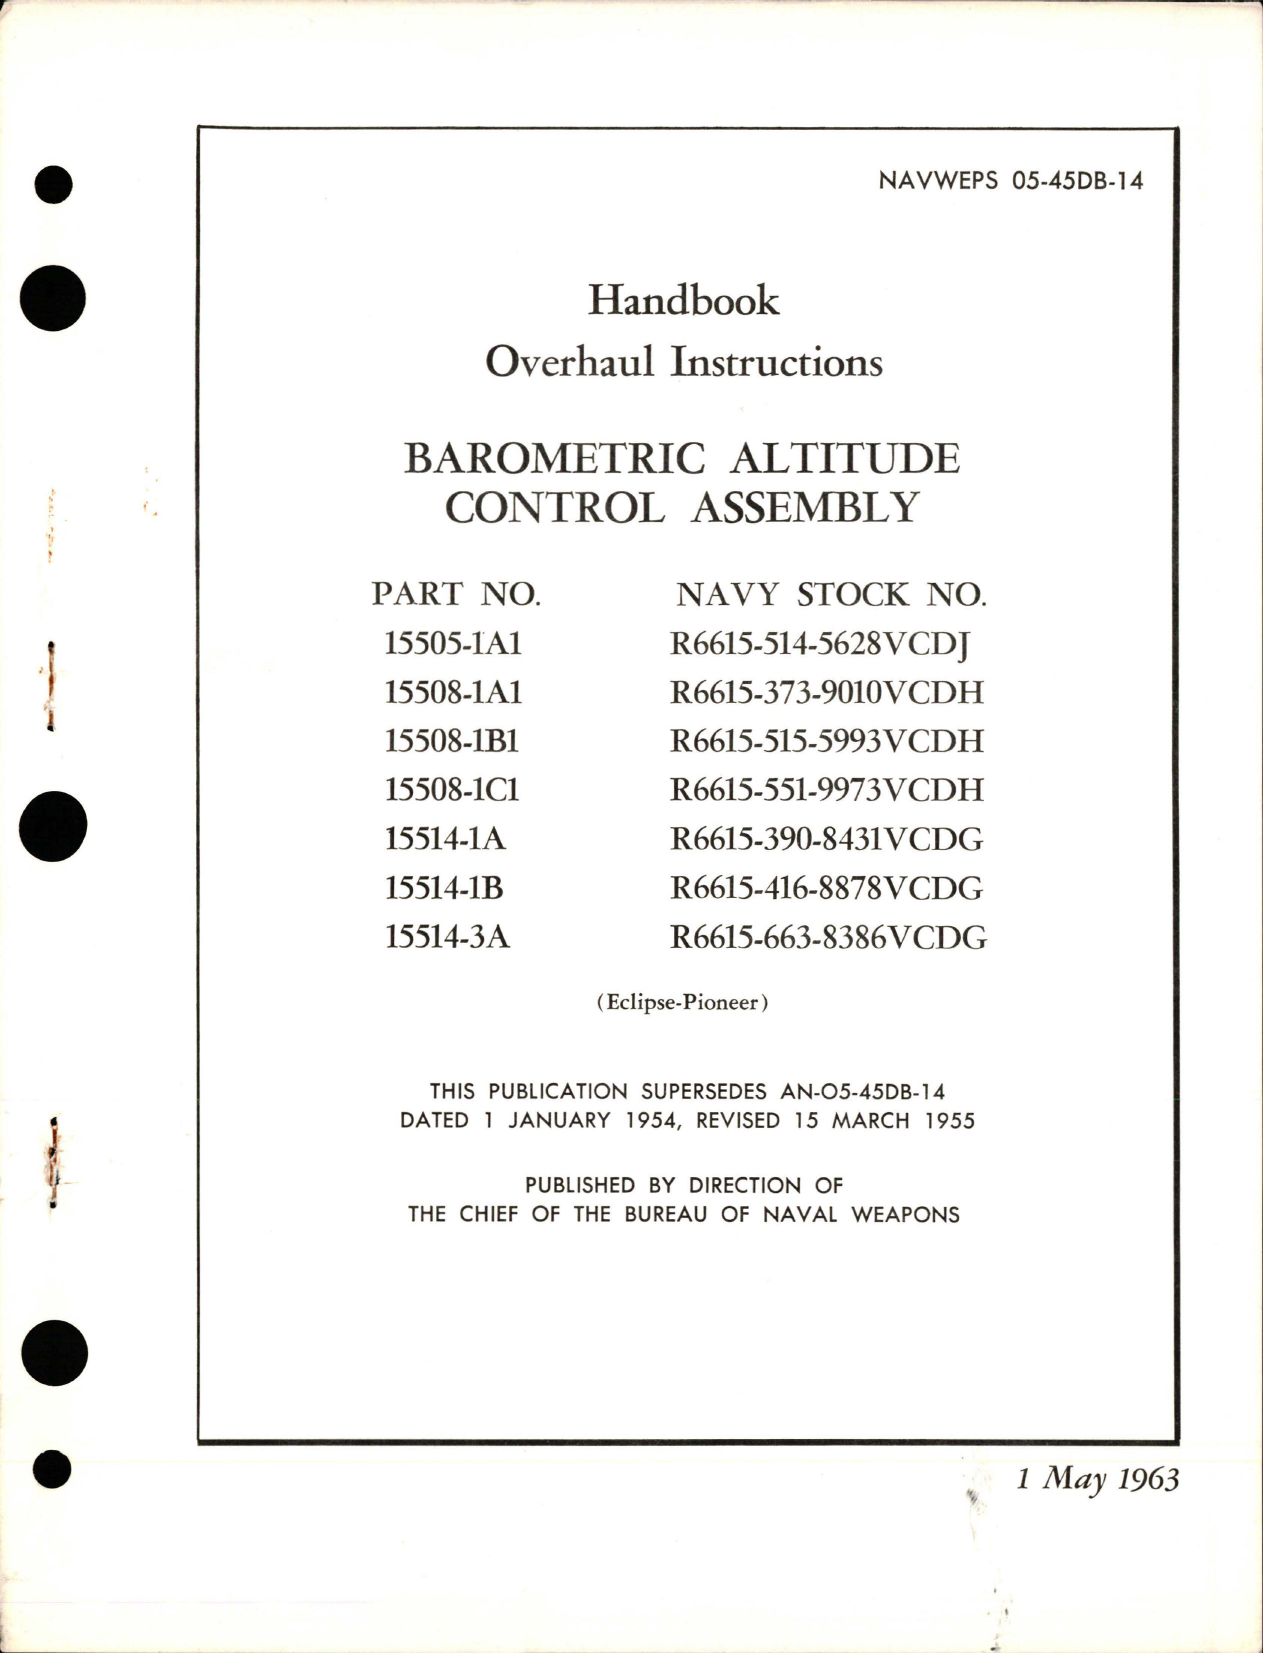 Sample page 1 from AirCorps Library document: Overhaul Instructions for Barometric Altitude Control Assembly